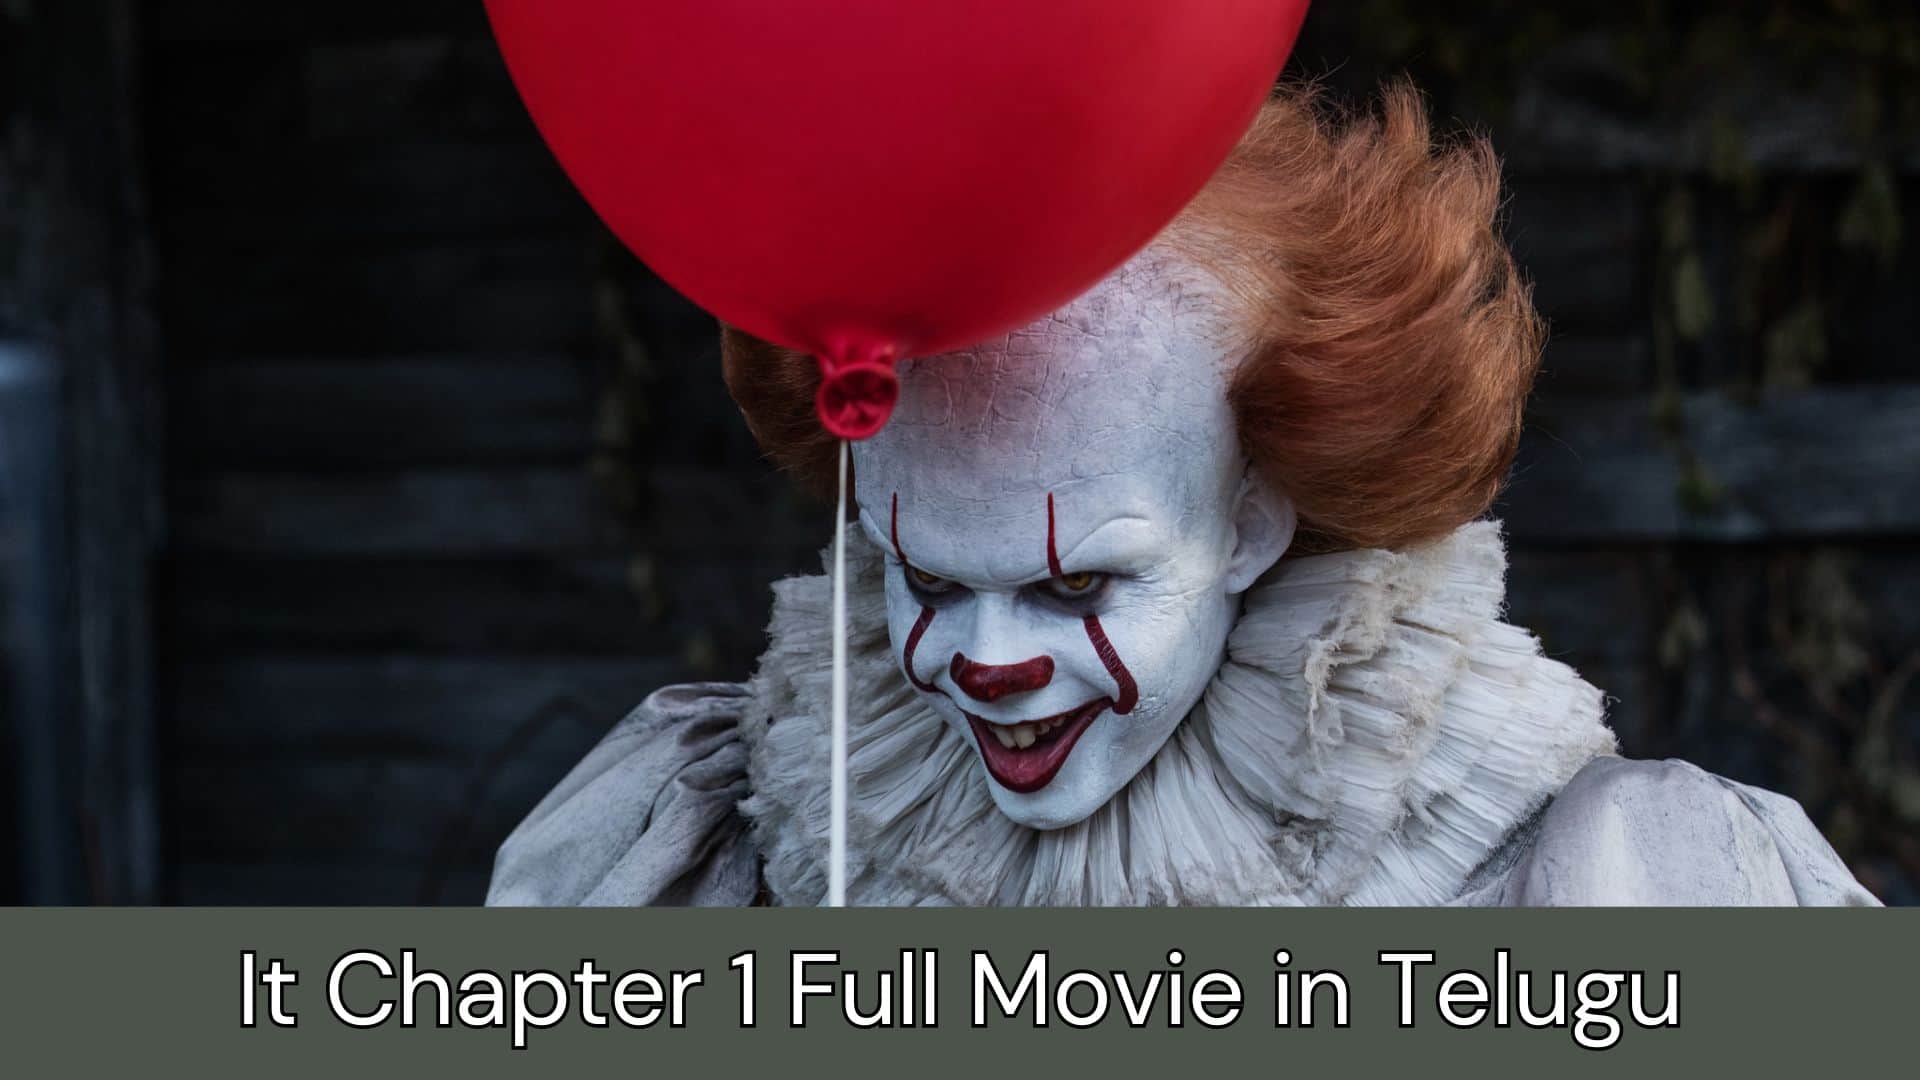 It Chapter 1 Full Movie Cast, Box Office, Budget, Story, Trailer